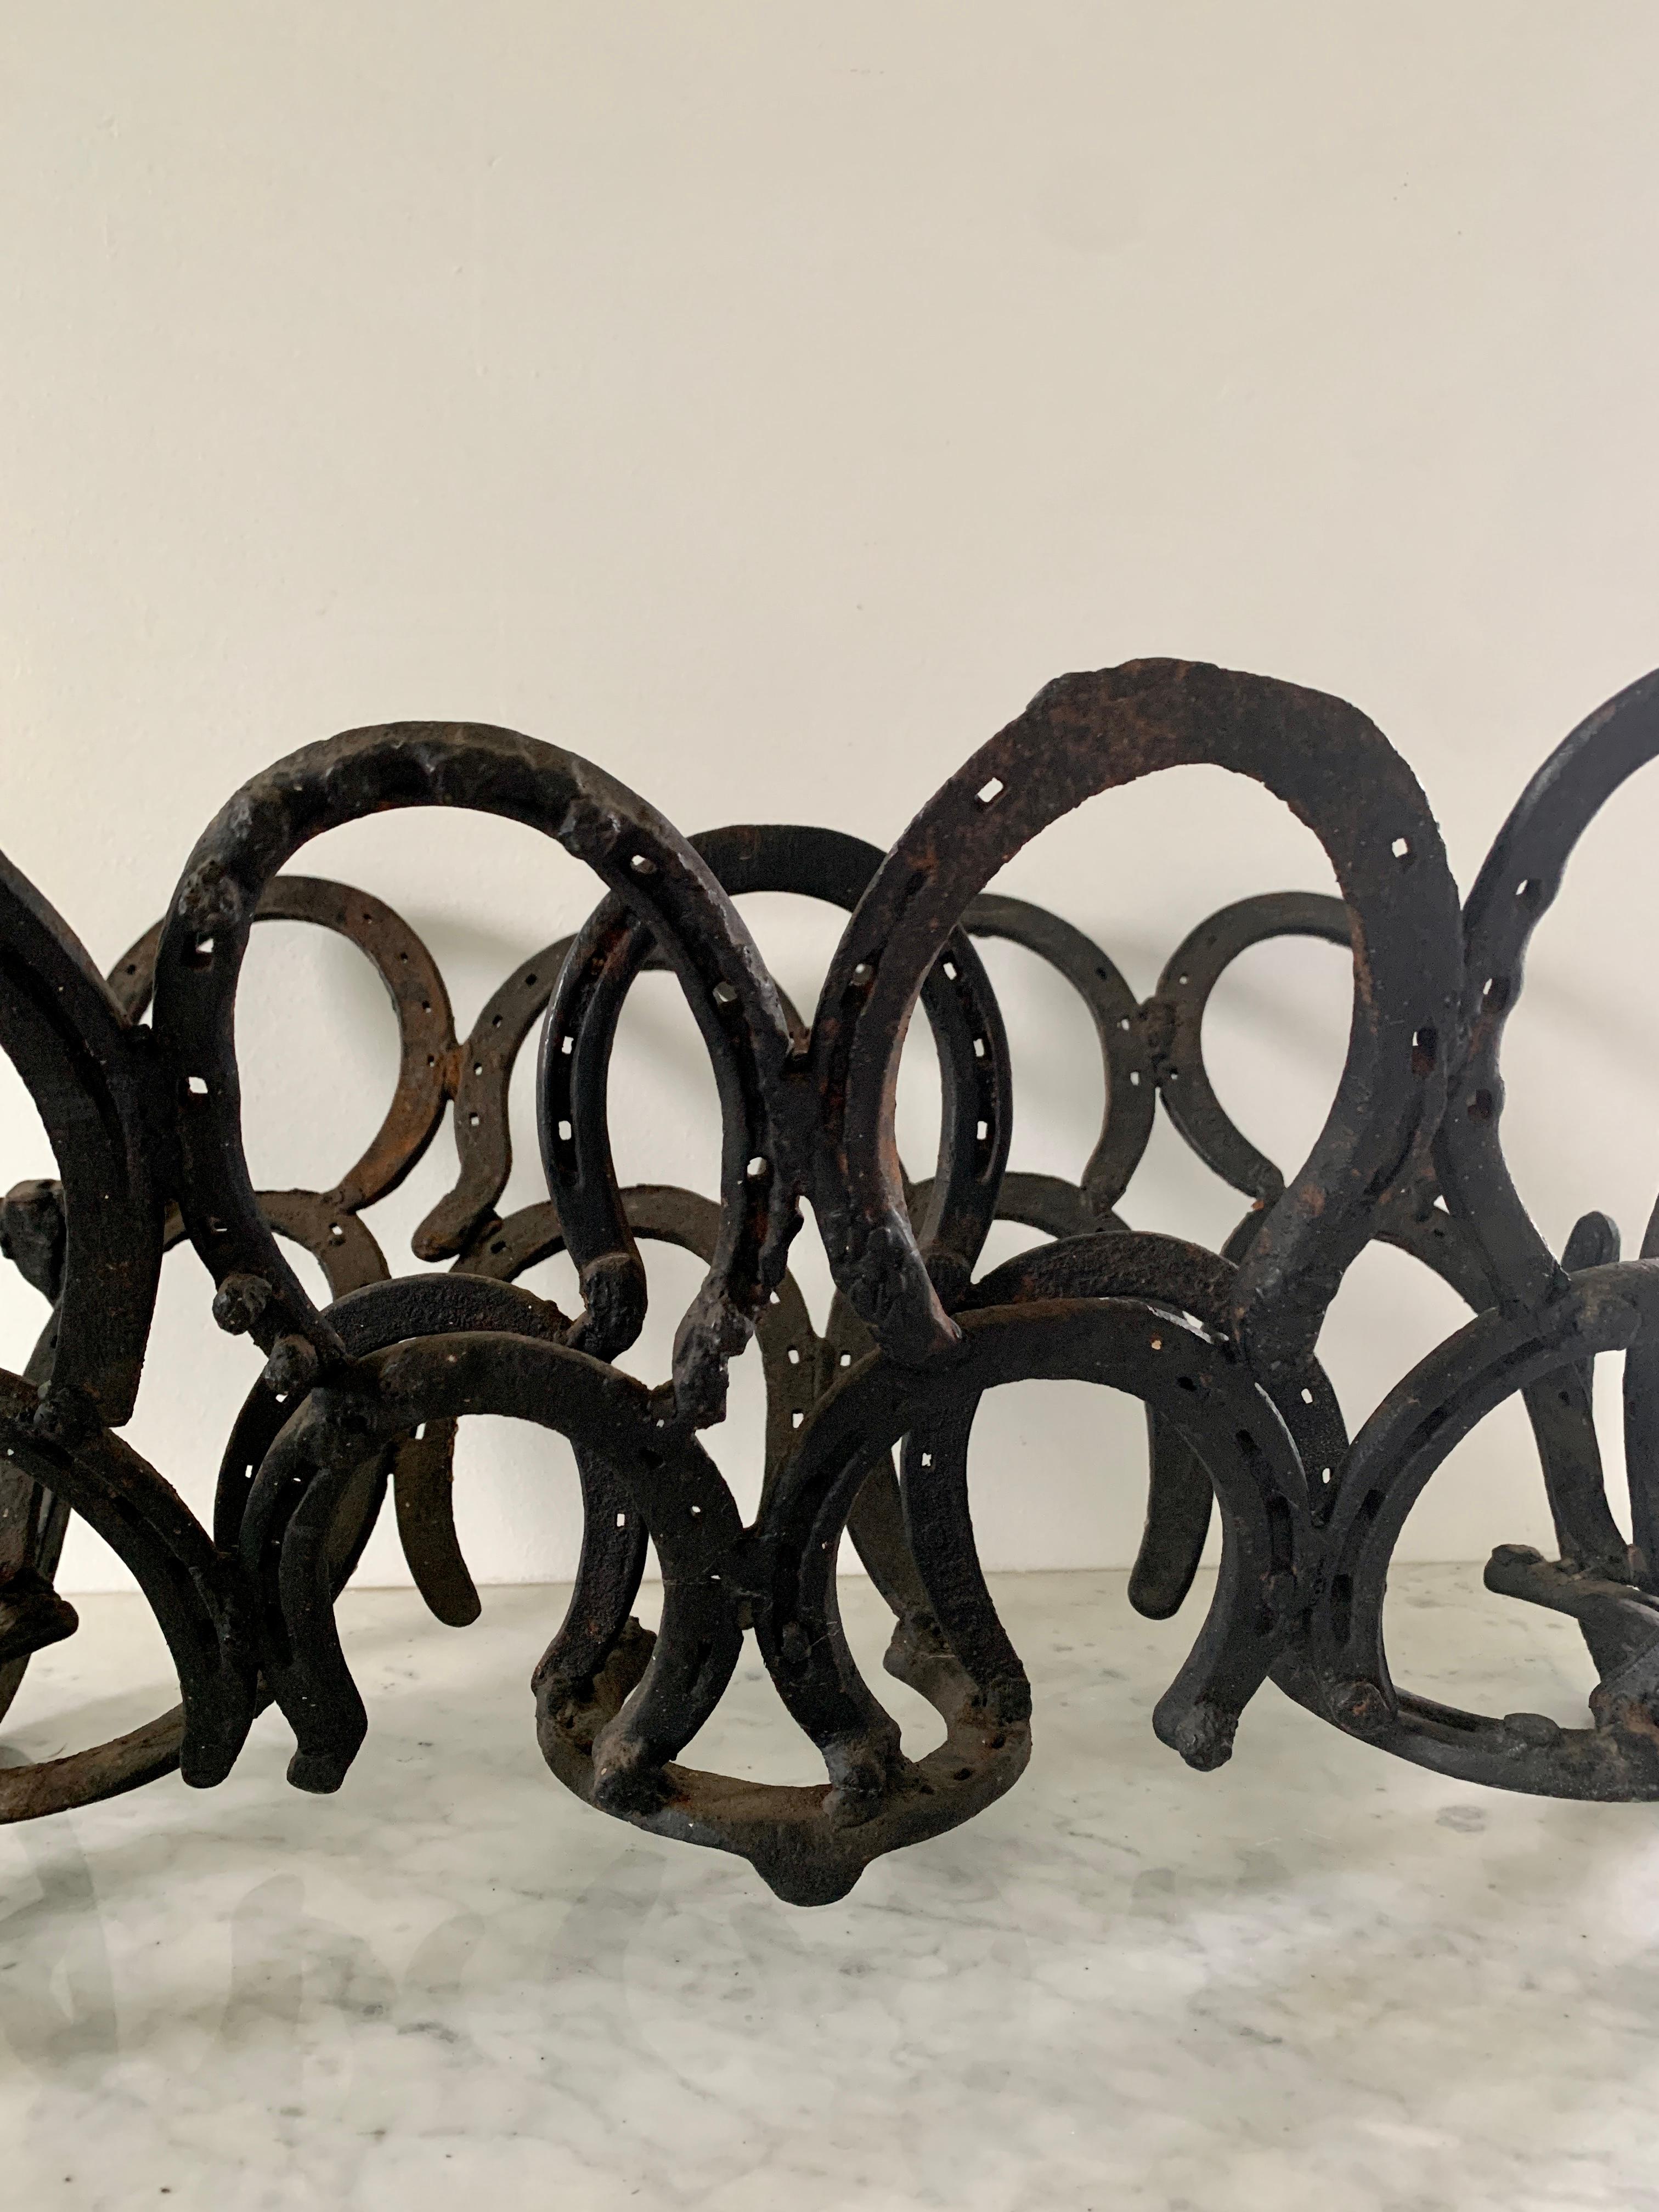 Vintage Equestrian Hand Forged Cast Iron Horseshoe Magazine Rack or Book Stand In Good Condition For Sale In Elkhart, IN